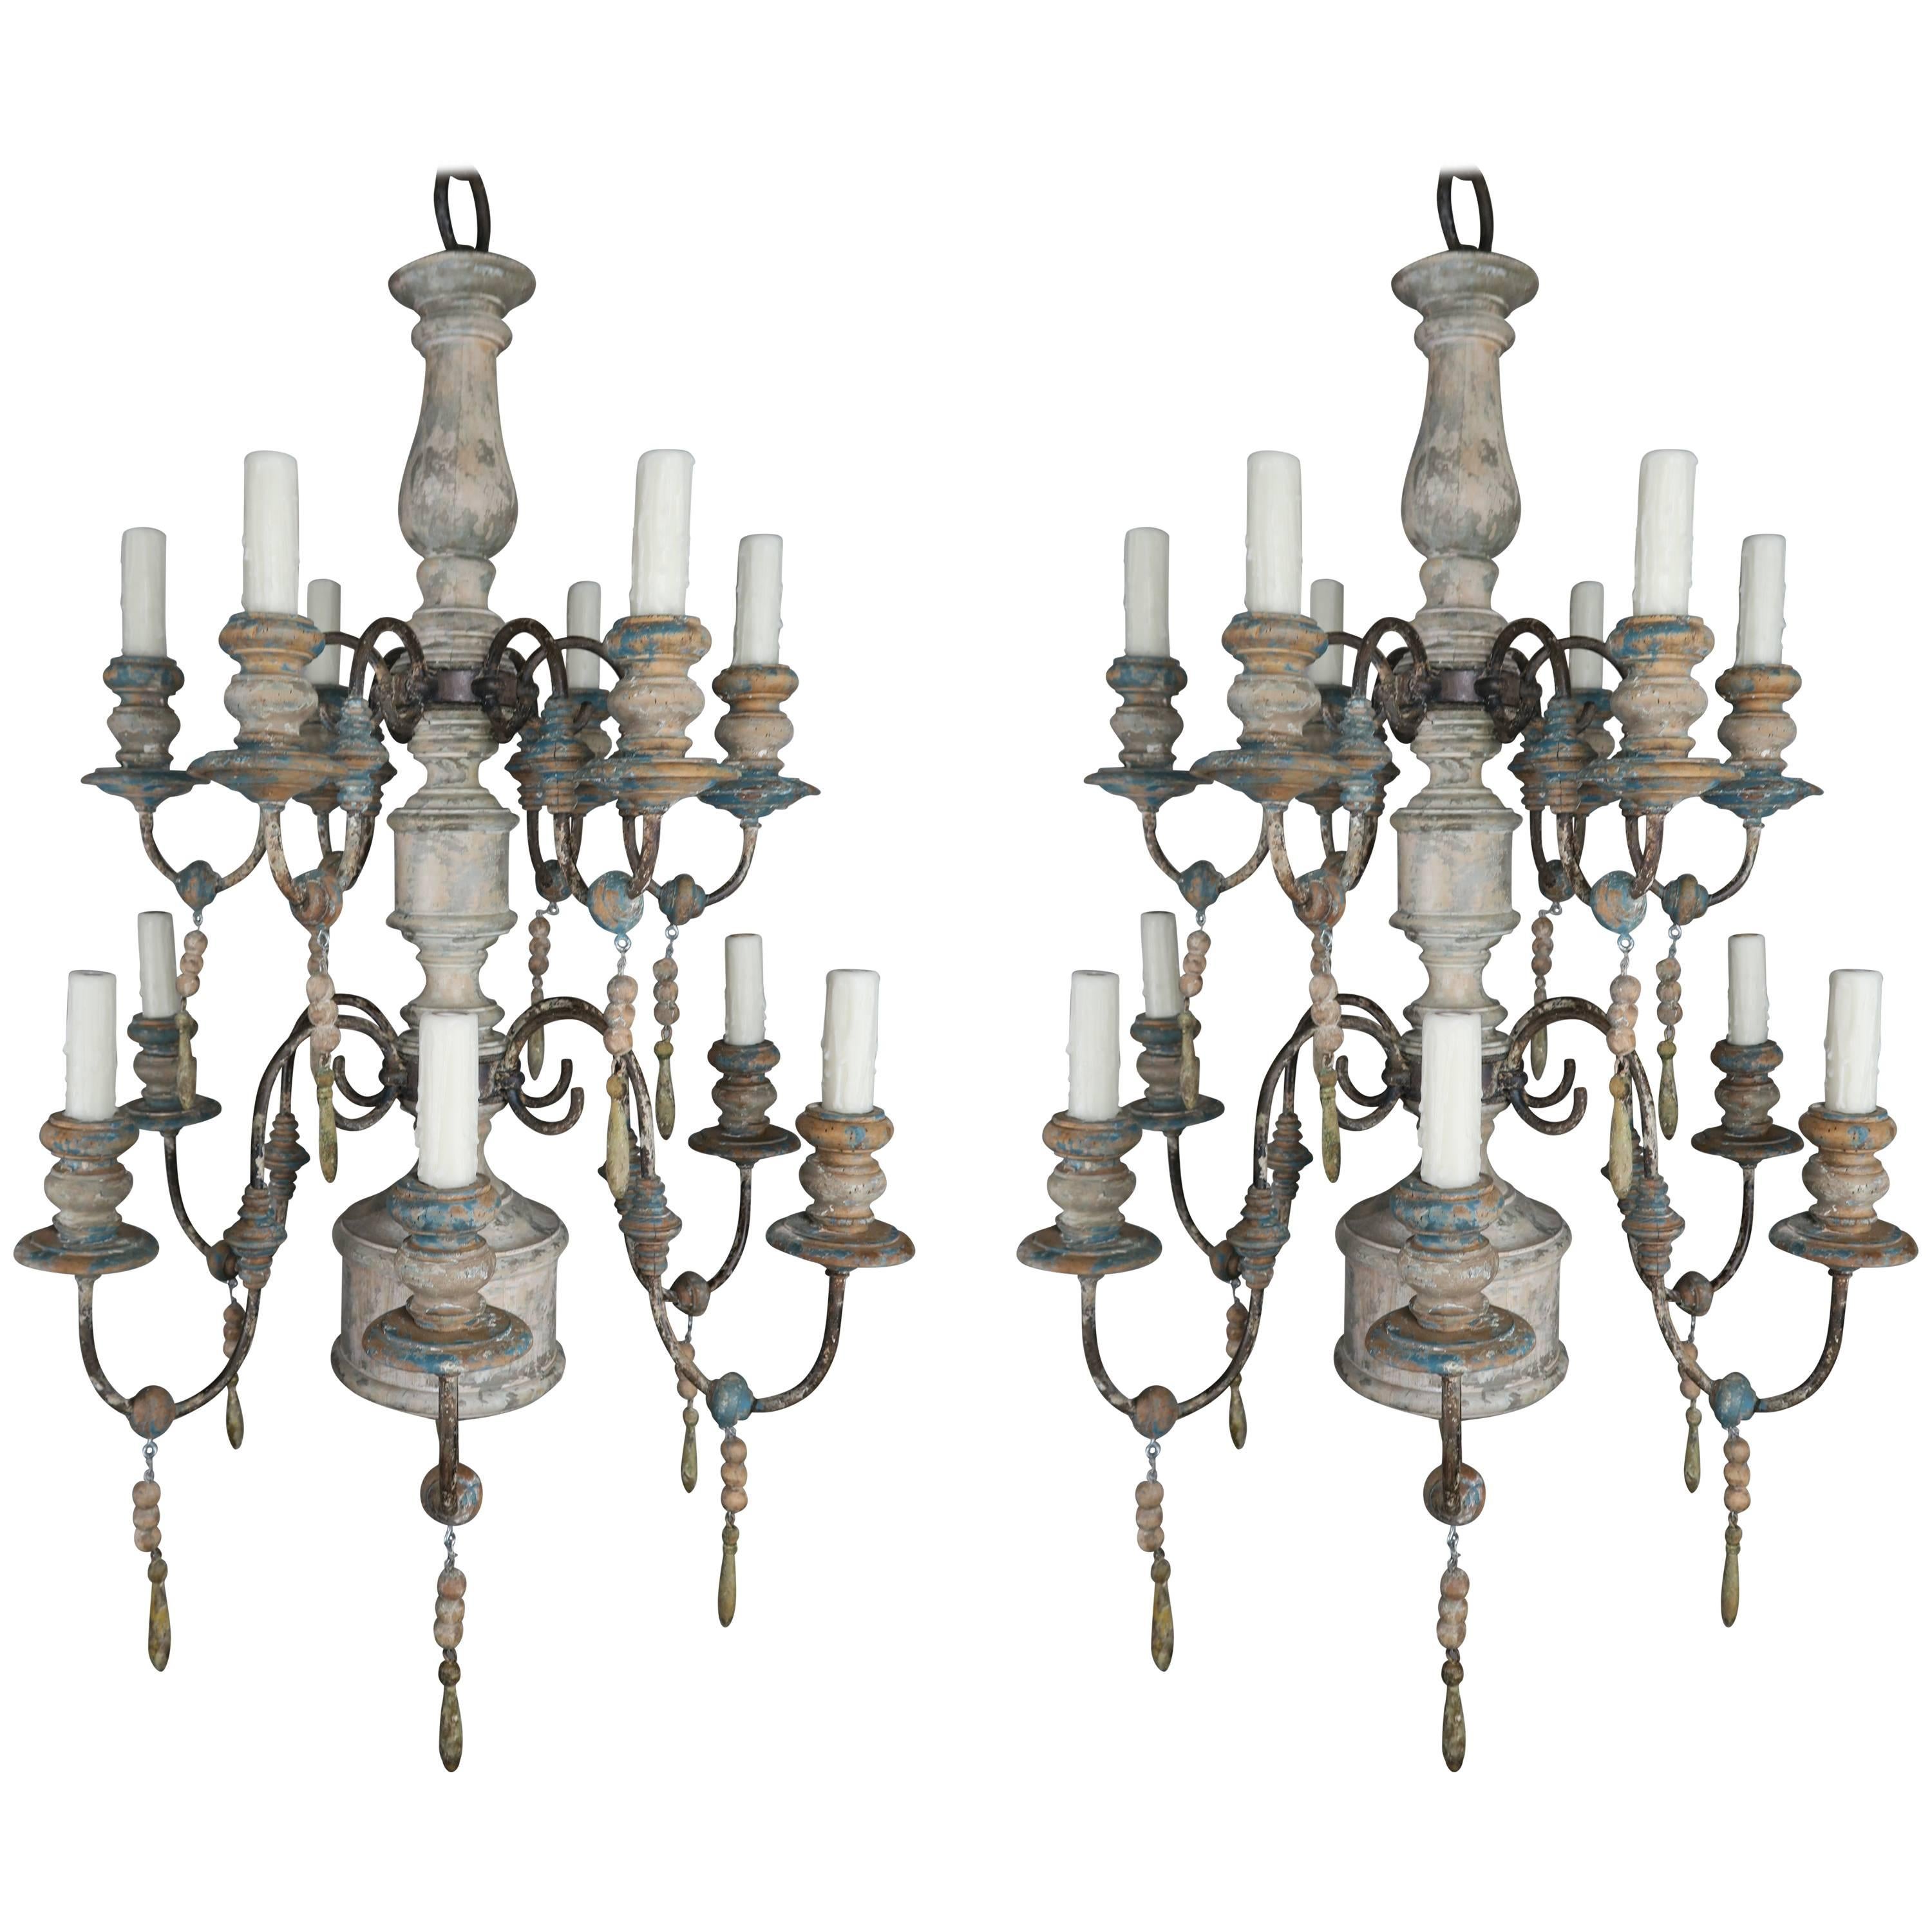 Pair of Twelve-Light Wood and Iron Painted Chandeliers